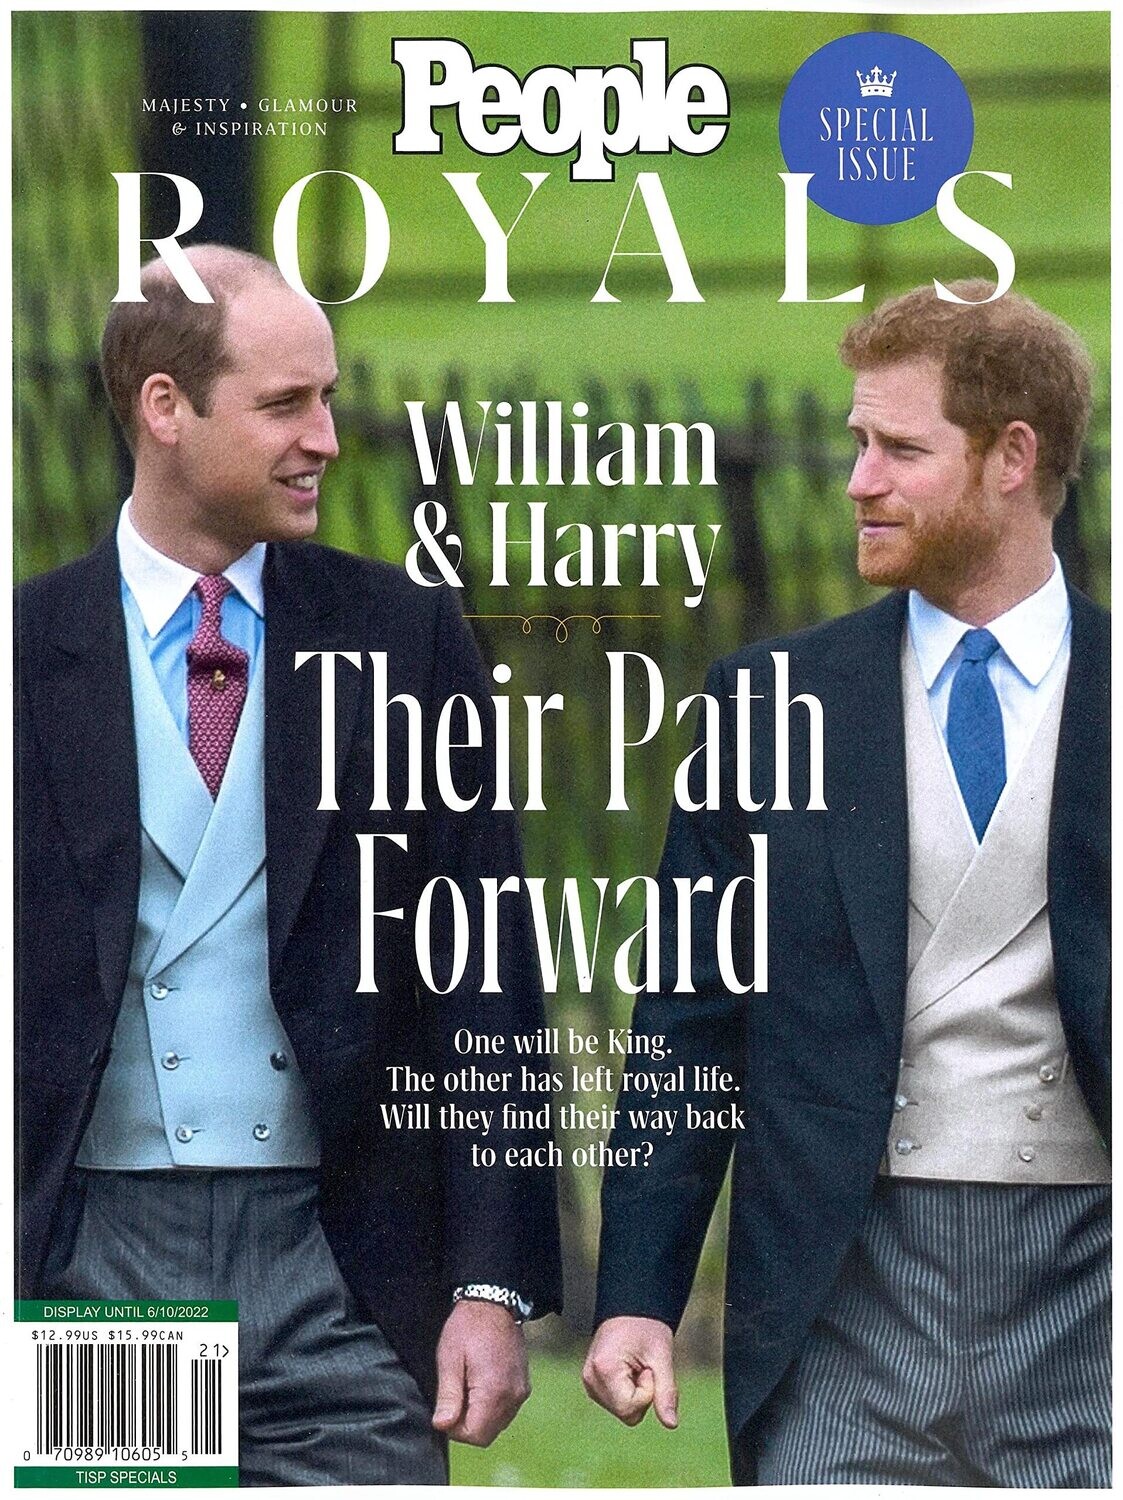 People Royals Magazine - William & Harry -Special Issue